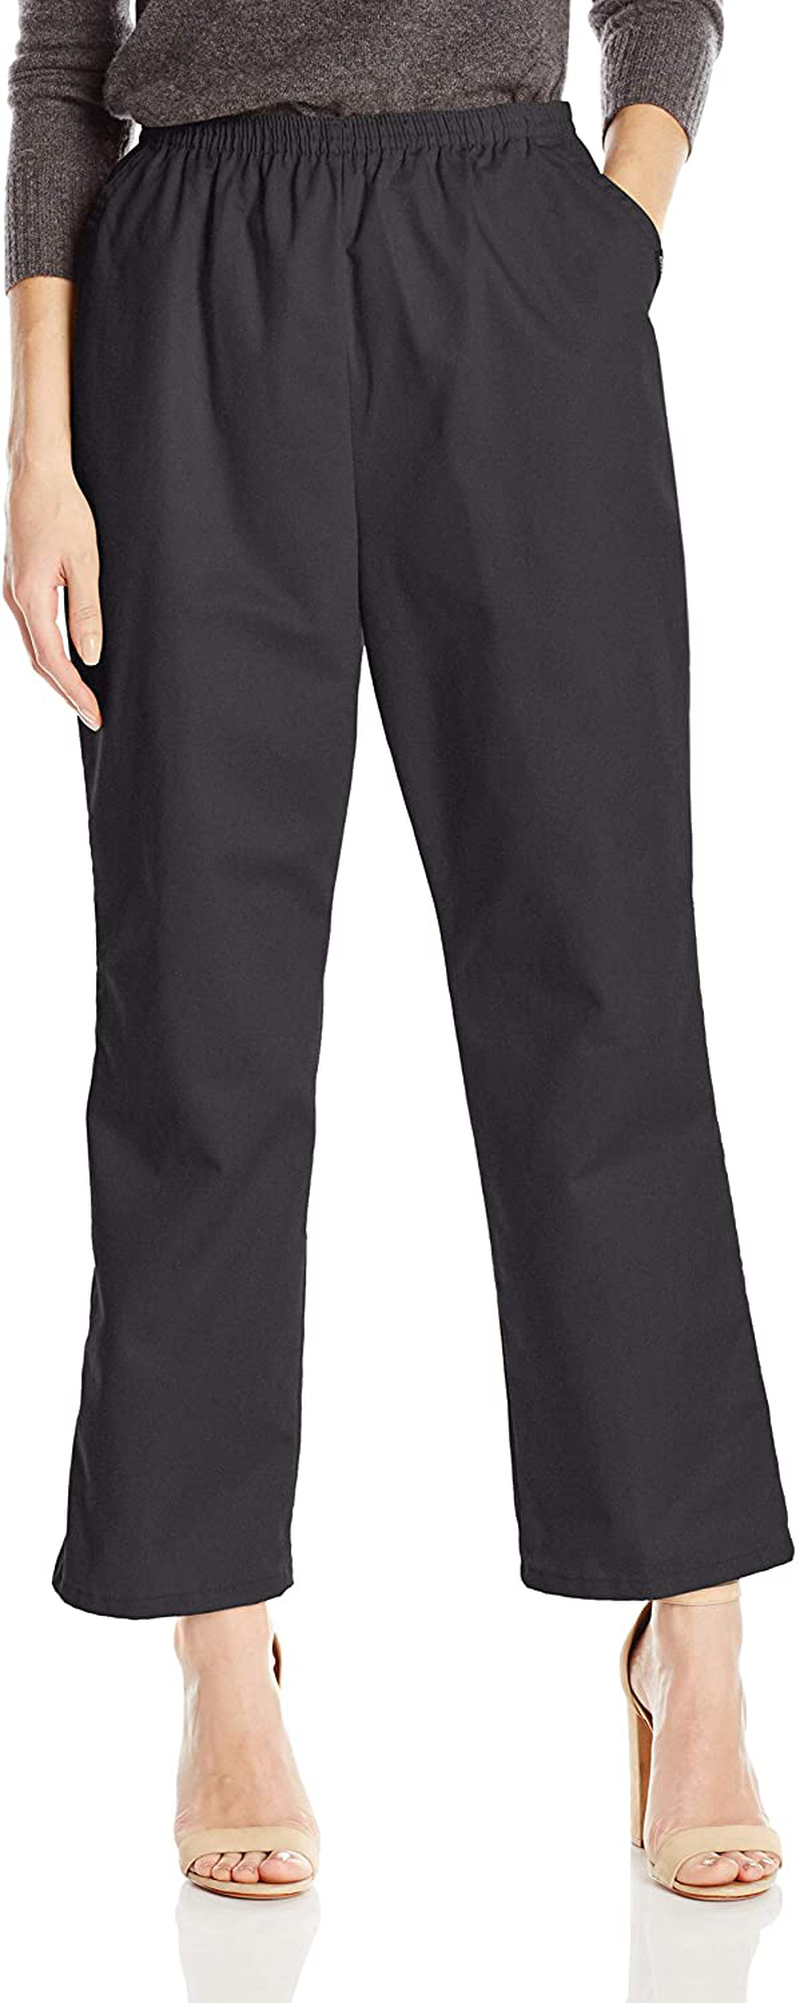 Chic Classic Collection Women's Cotton Pull-on Pant with Elastic Waist